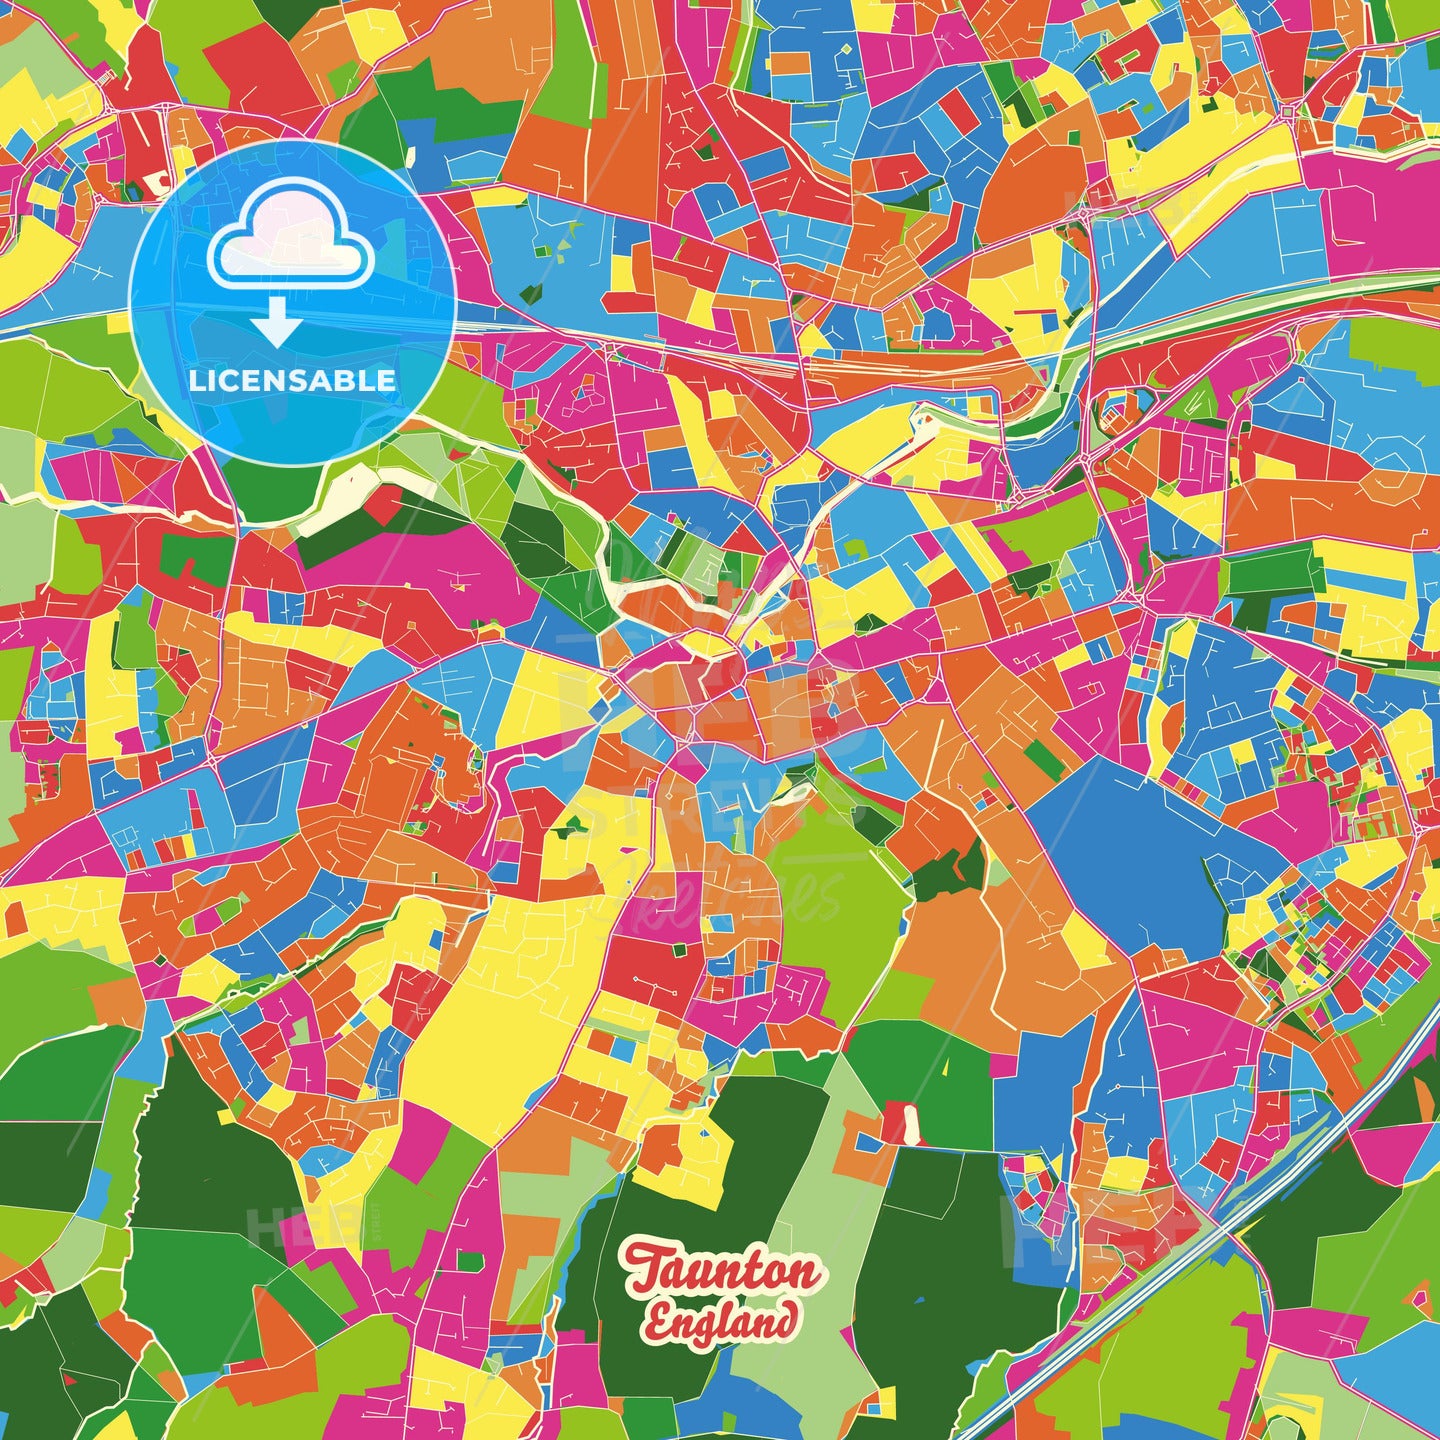 Taunton, England Crazy Colorful Street Map Poster Template - HEBSTREITS Sketches